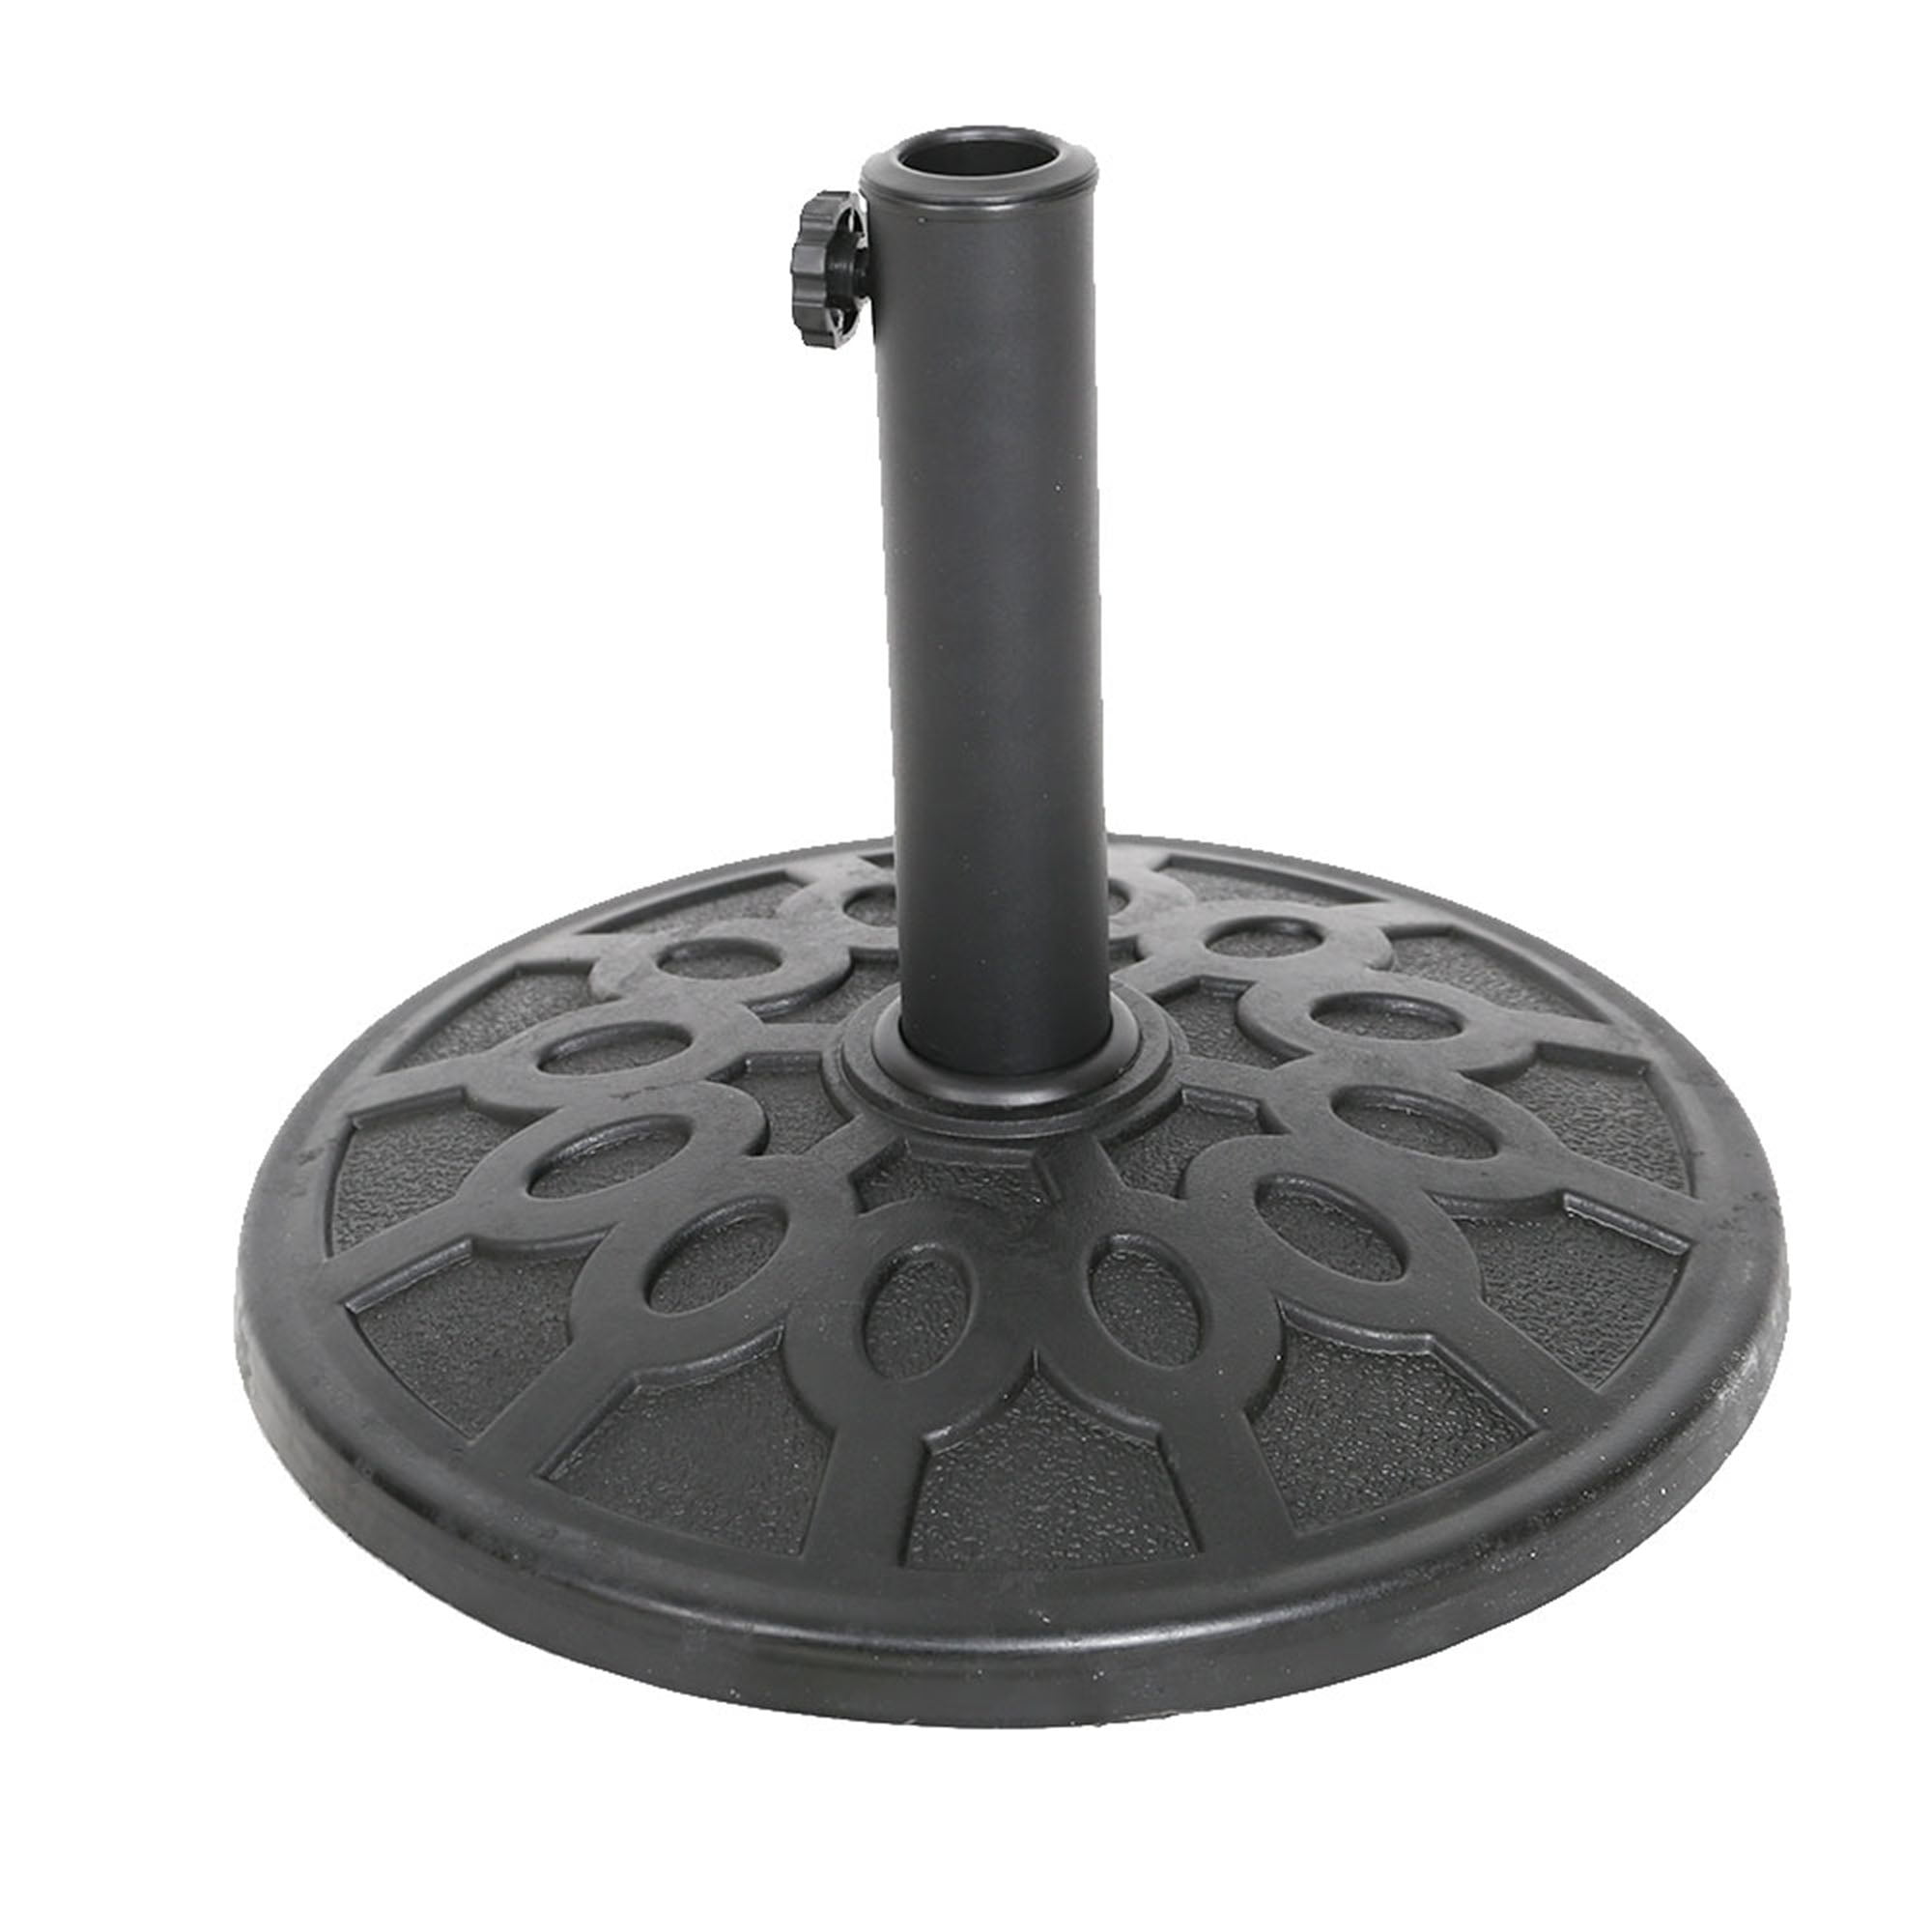 KARMAS PRODUCT 17 Inch Patio Umbrella Stand Outdoor Base Holder Heavy